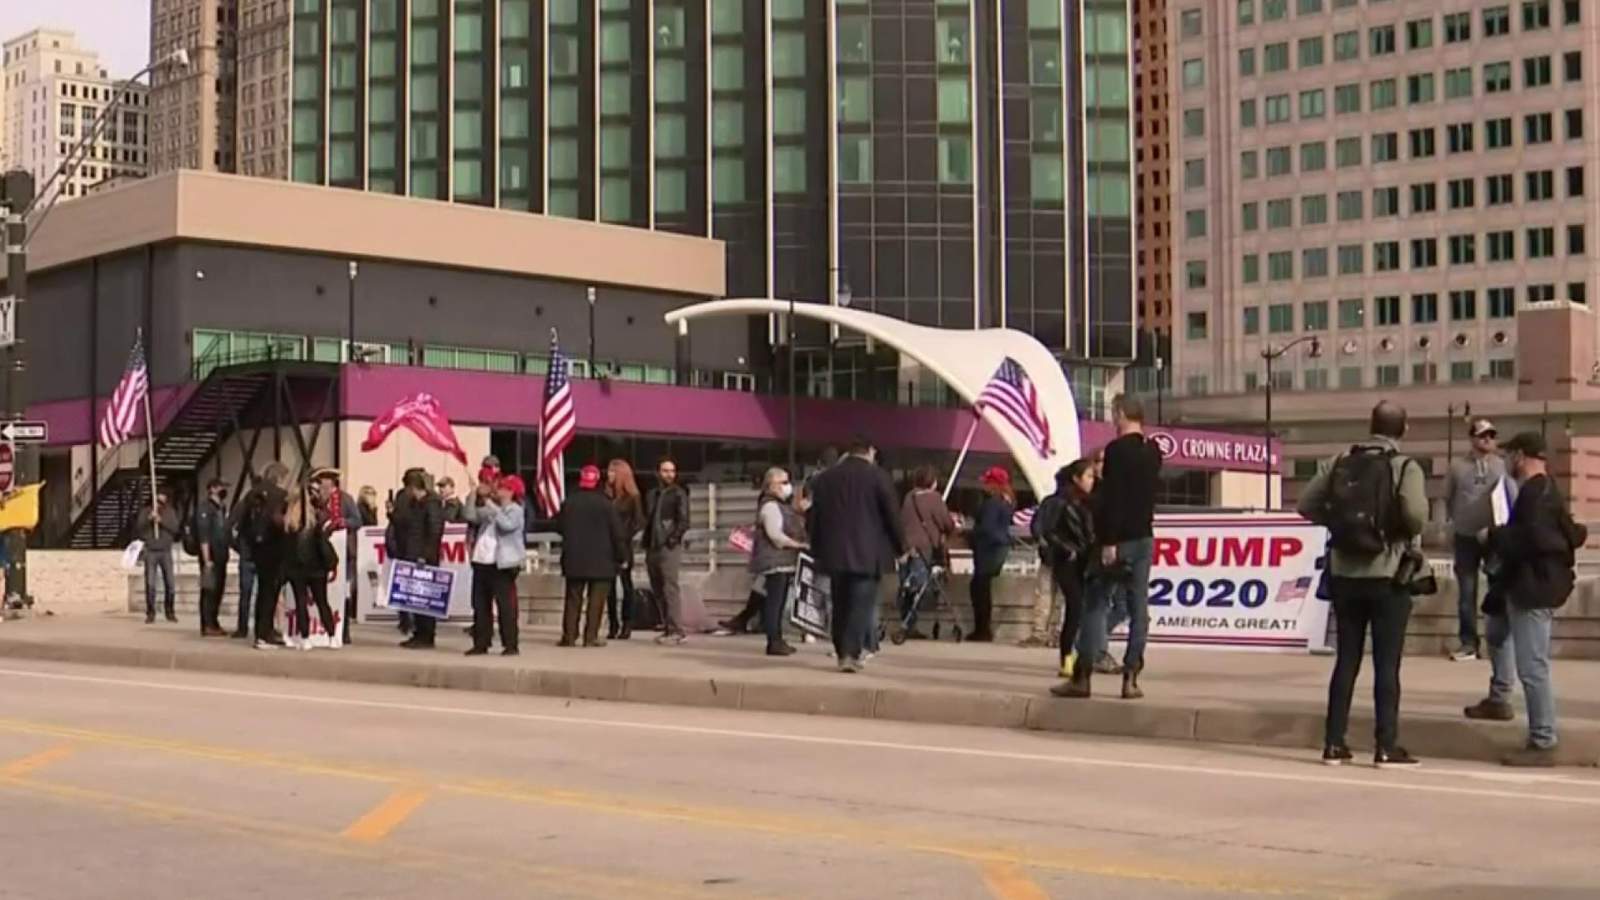 Experts put the ballot count protests at TCF Center in Detroit into perspective